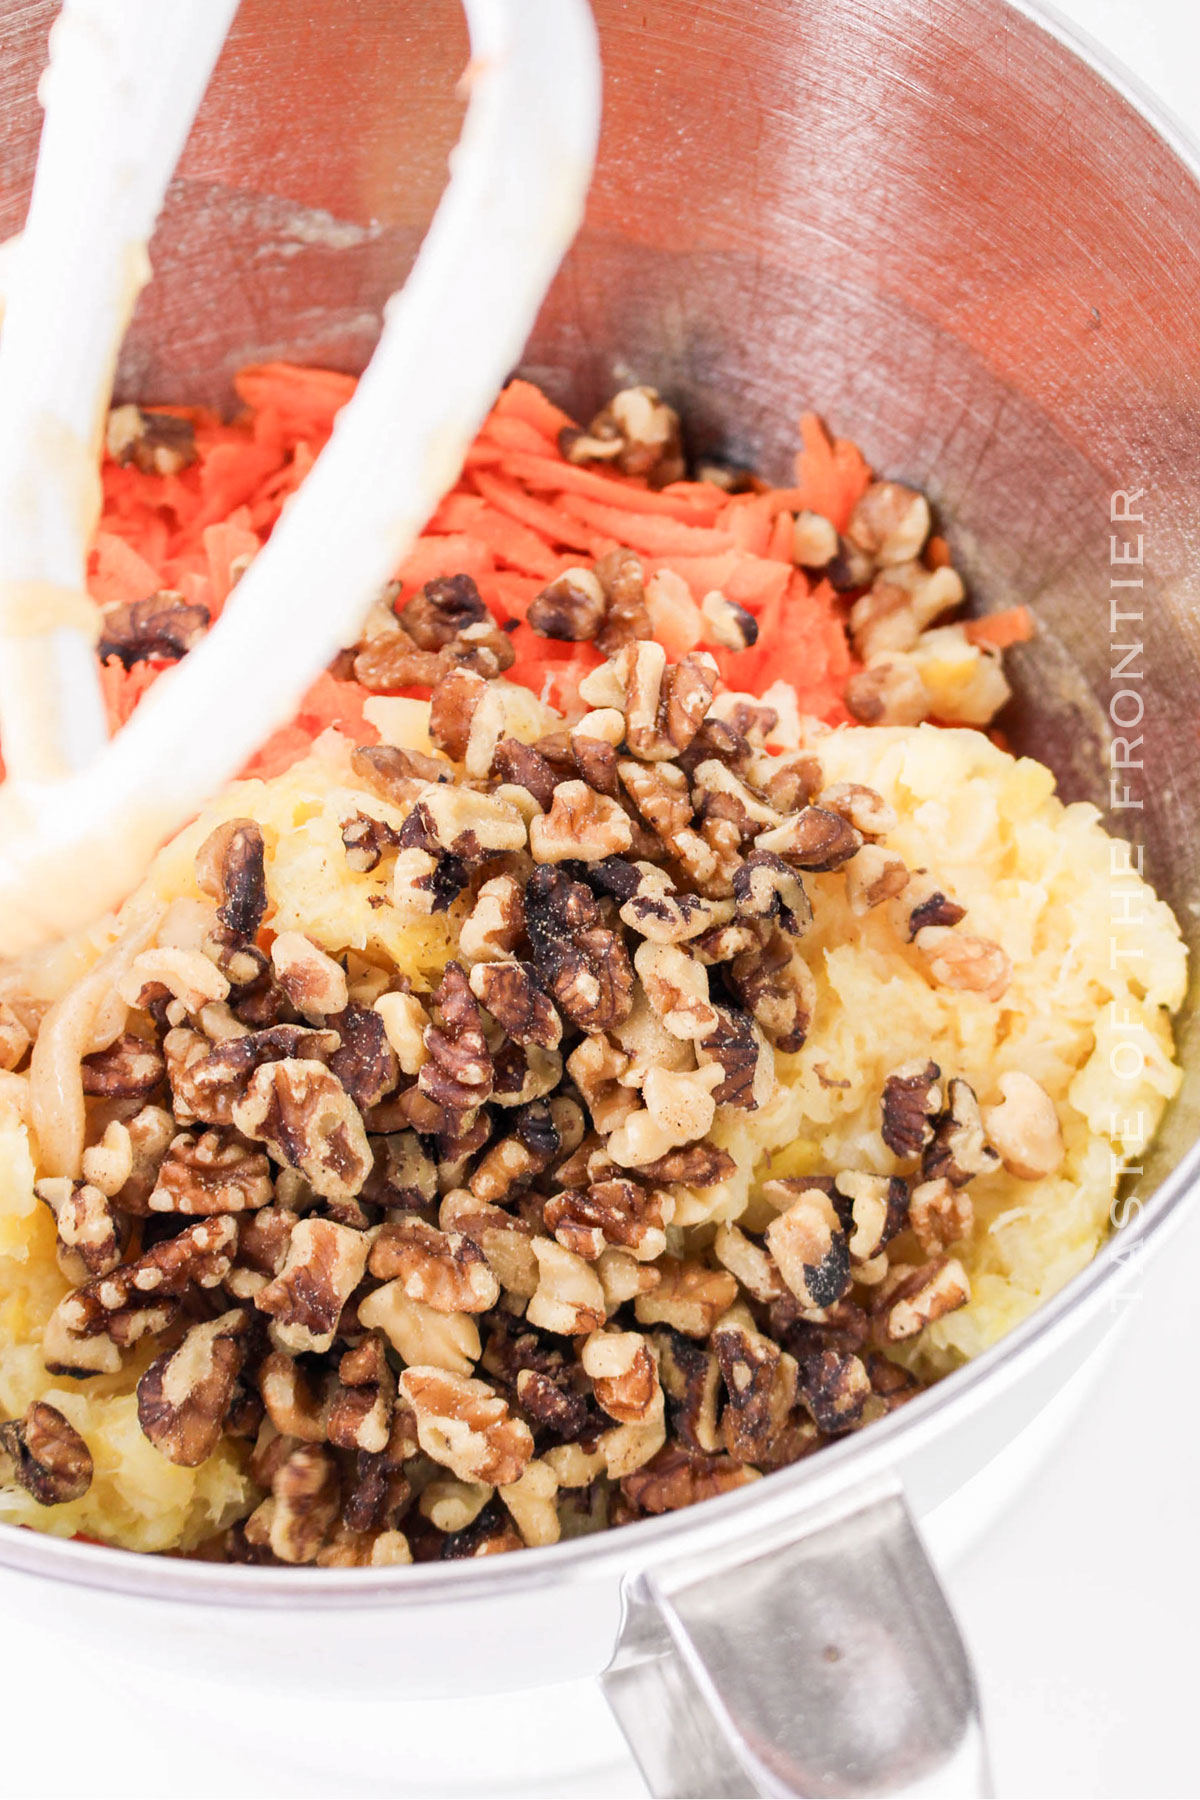 cake batter with carrots and nuts